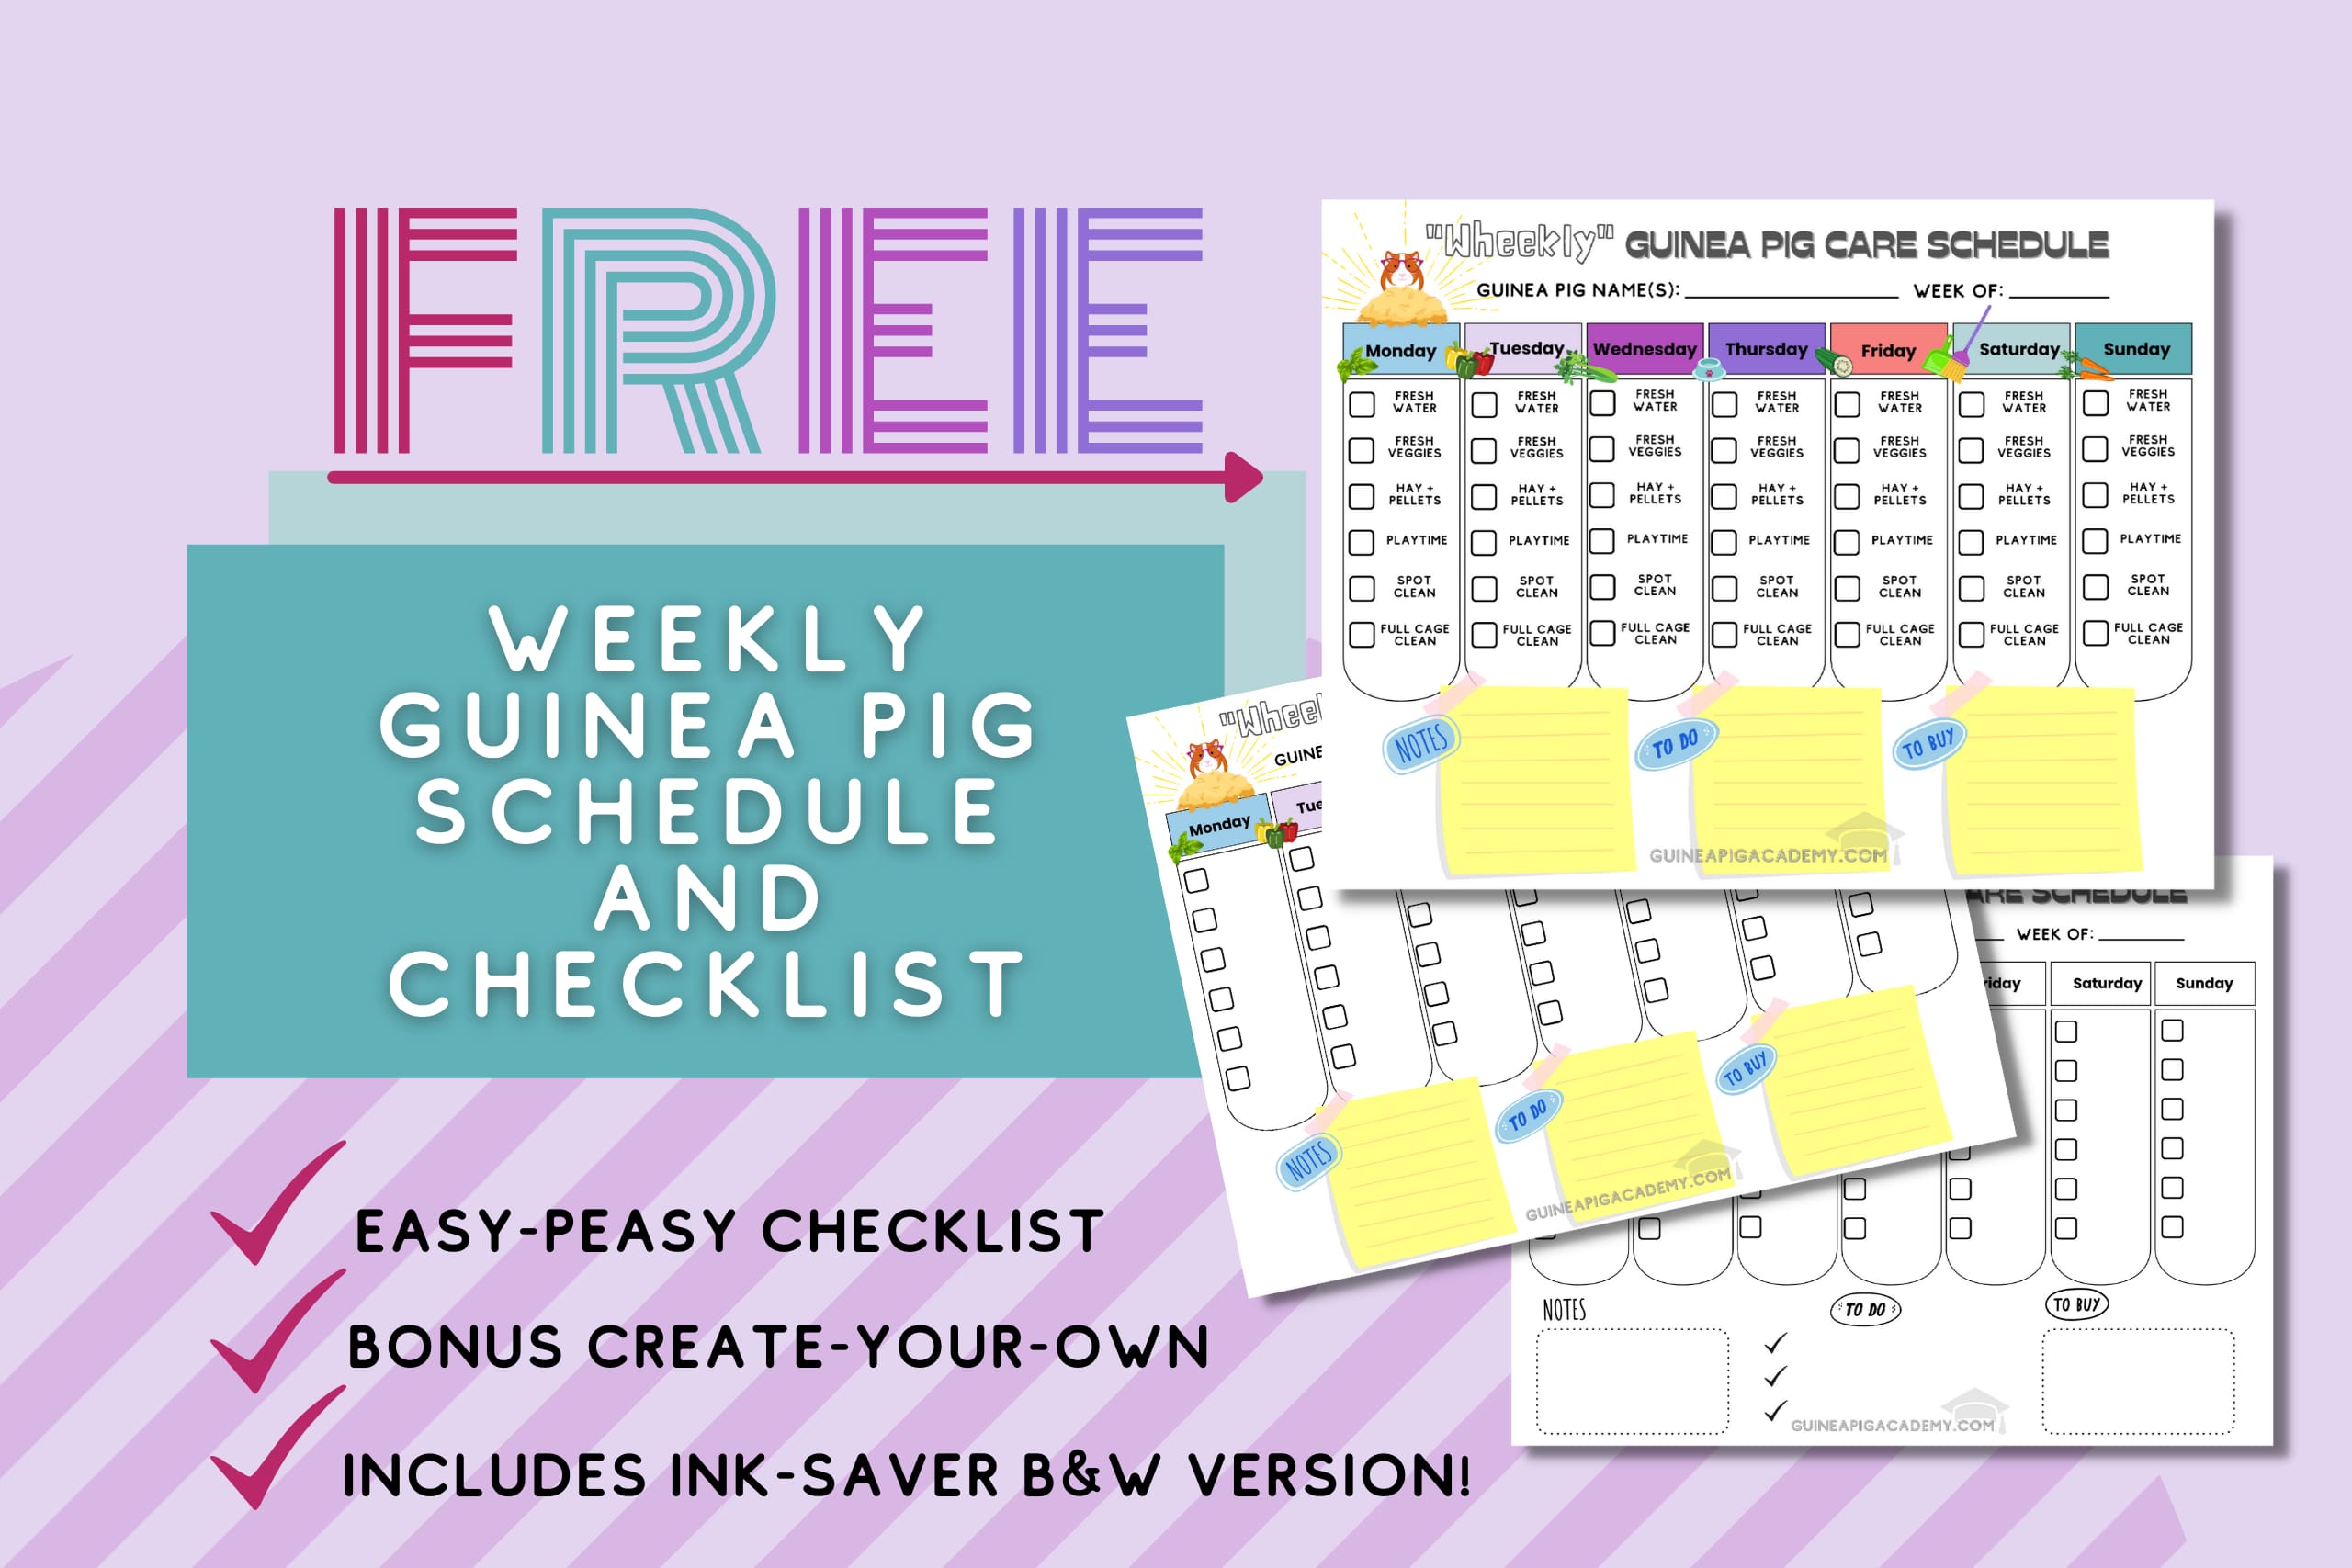 Free weekly Guinea Pig Schedule Checklist Food Cleaning